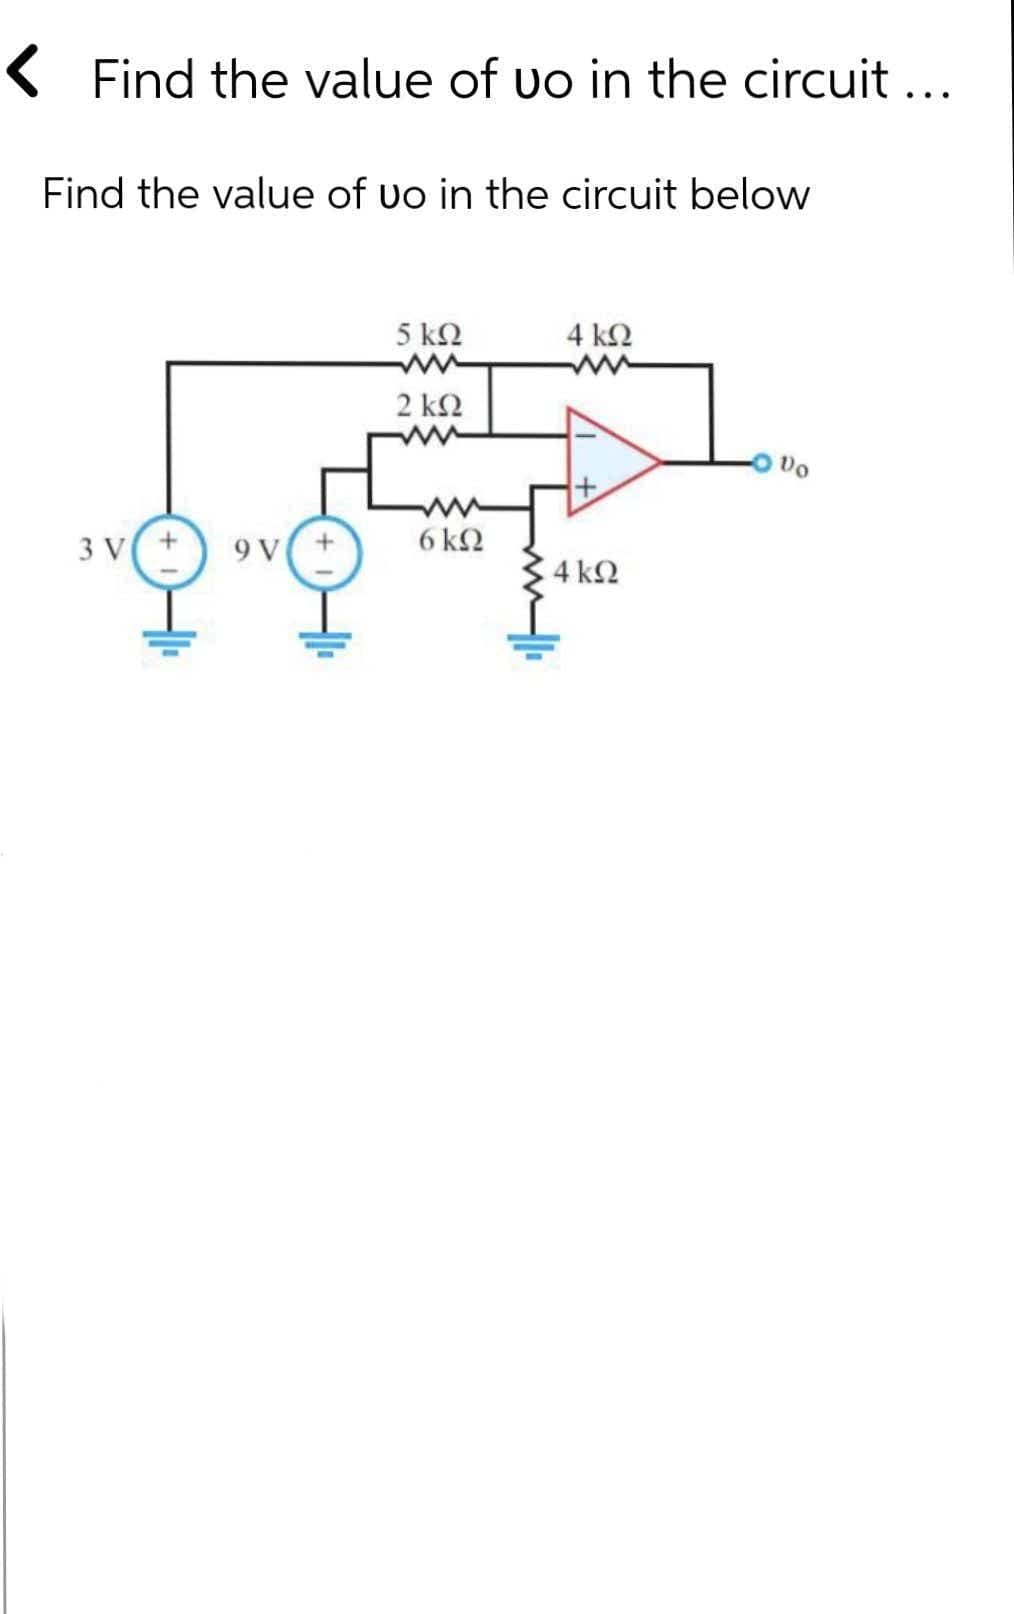 ( Find the value of vo in the circuit ...
Find the value of vo in the circuit below
5 ΚΩ
4 ΚΩ
2 k2
3 V
9 V
6 kΩ
4 ΚΩ
